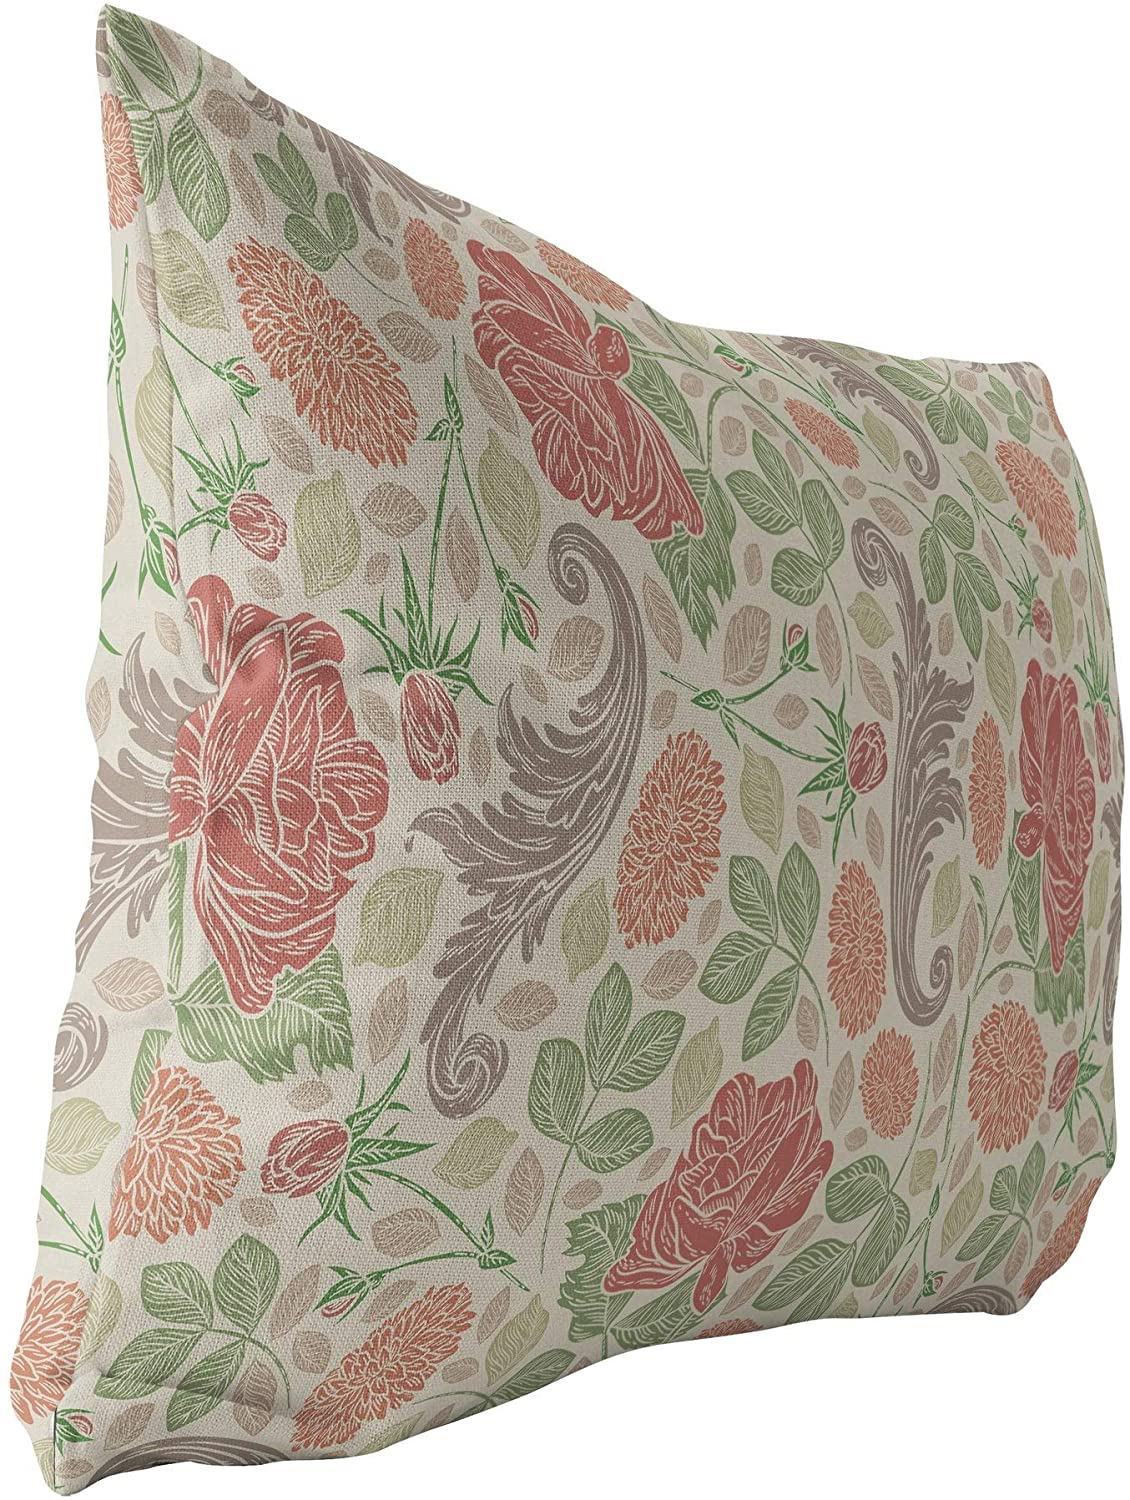 Ivory Indoor|Outdoor Lumbar Pillow 20x14 Tan Floral Modern Contemporary Polyester Removable Cover